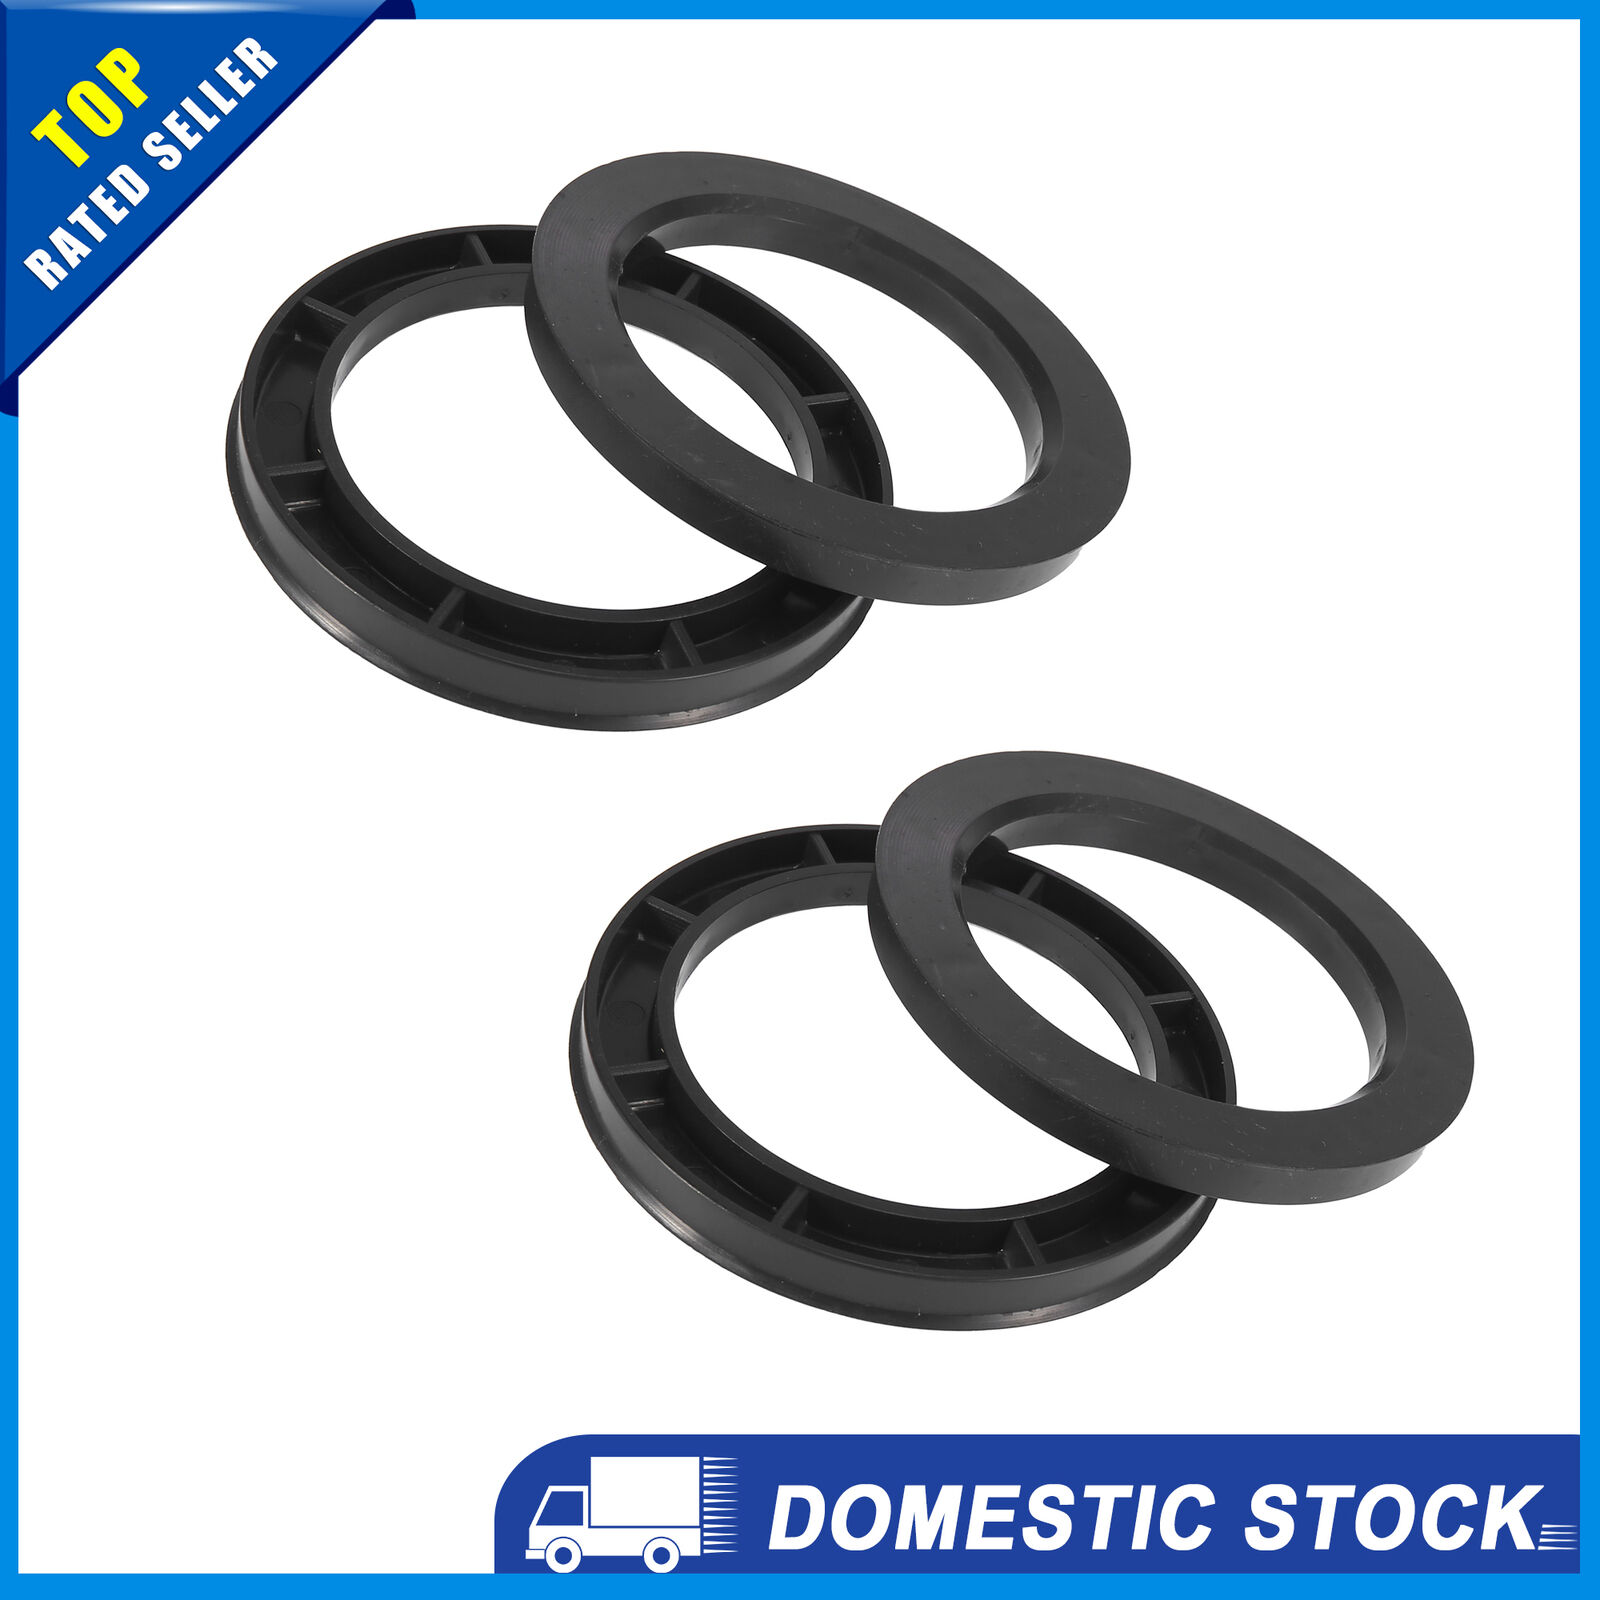 Universal 78.1mm-106mm Car Hub Centric Rings Wheel Bore Center Spacer Pack of 4